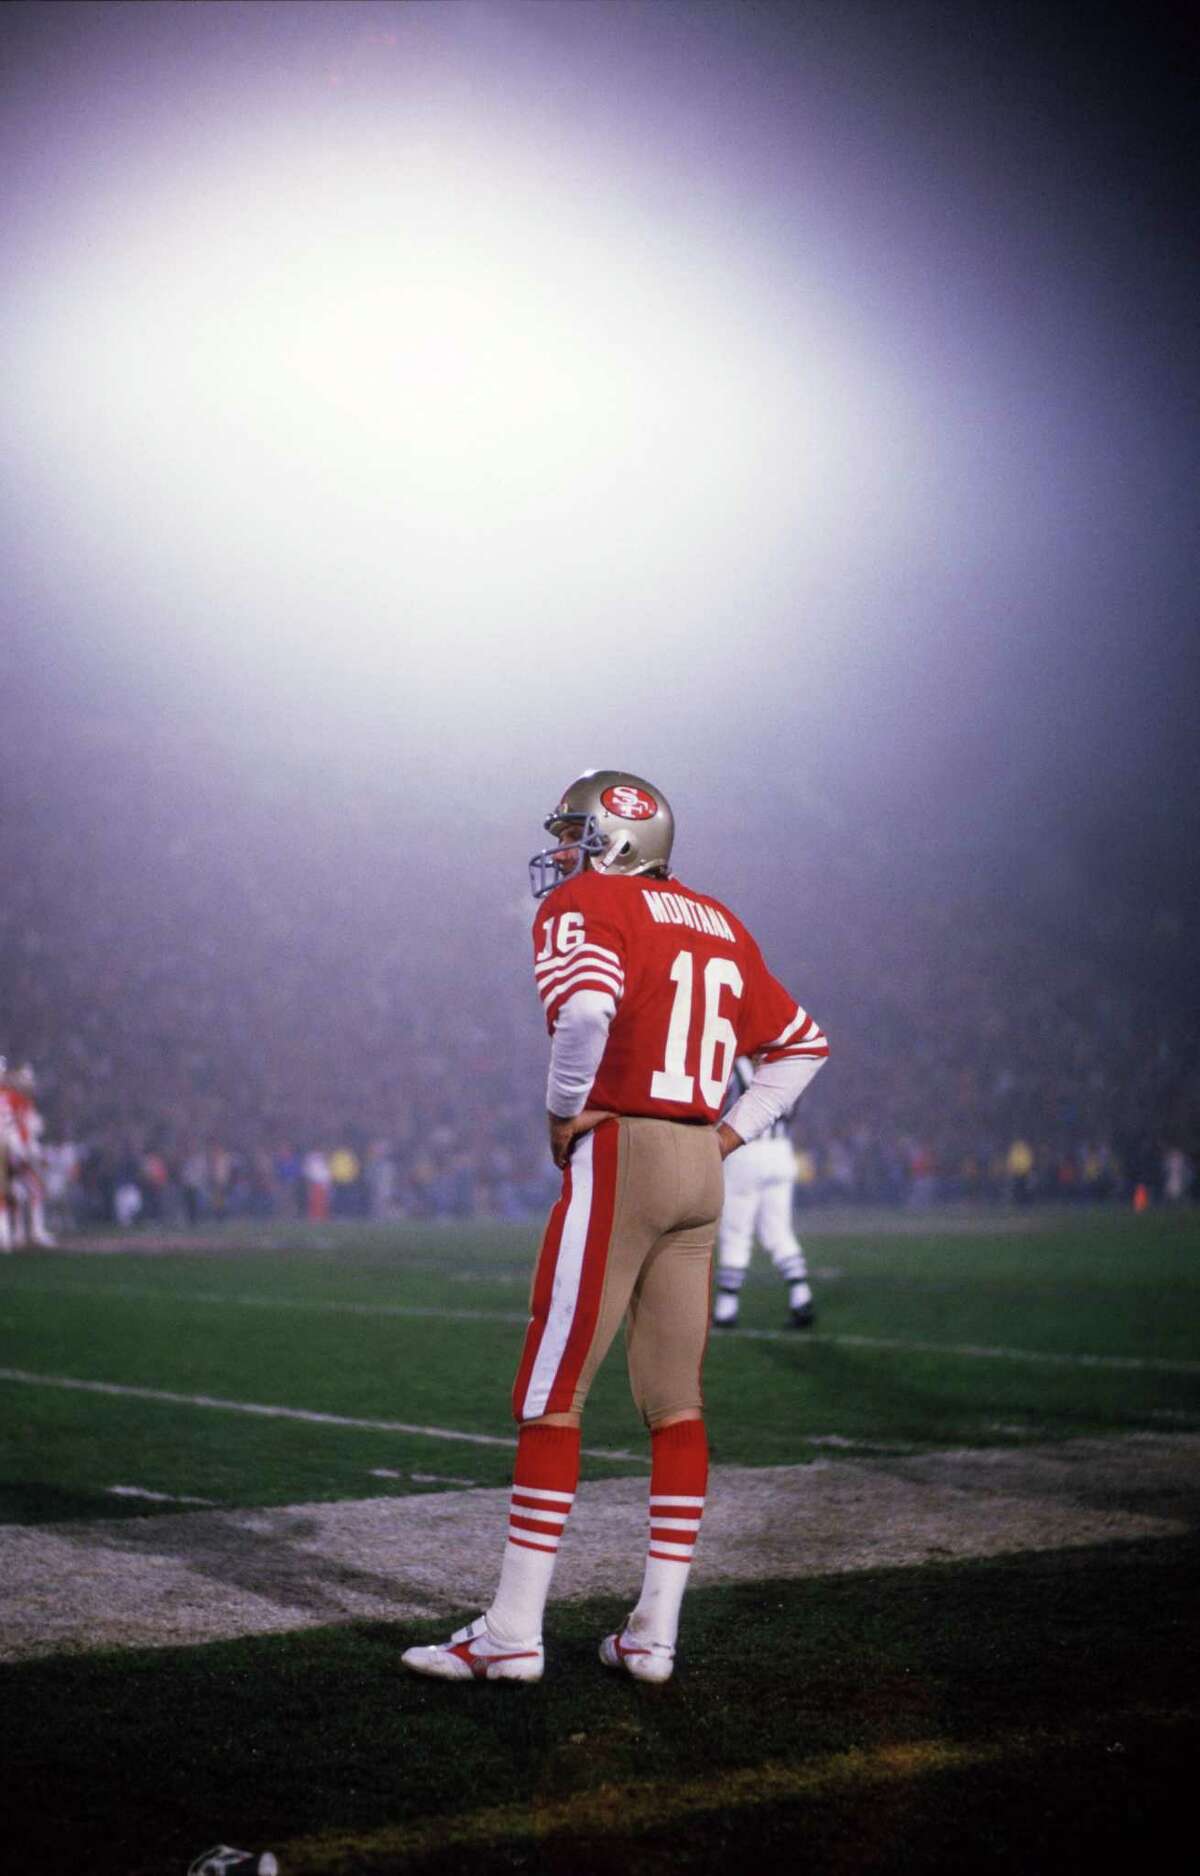 21 Jan 1985: Quarterback Joe Montana of the San Francisco 49ers on the sideline during the Niners 38-16 victory over the Miami Dolphins in Super Bowl XIX at Stanford Stadium in Stanford, CA. (Photo by Icon Sportswire)